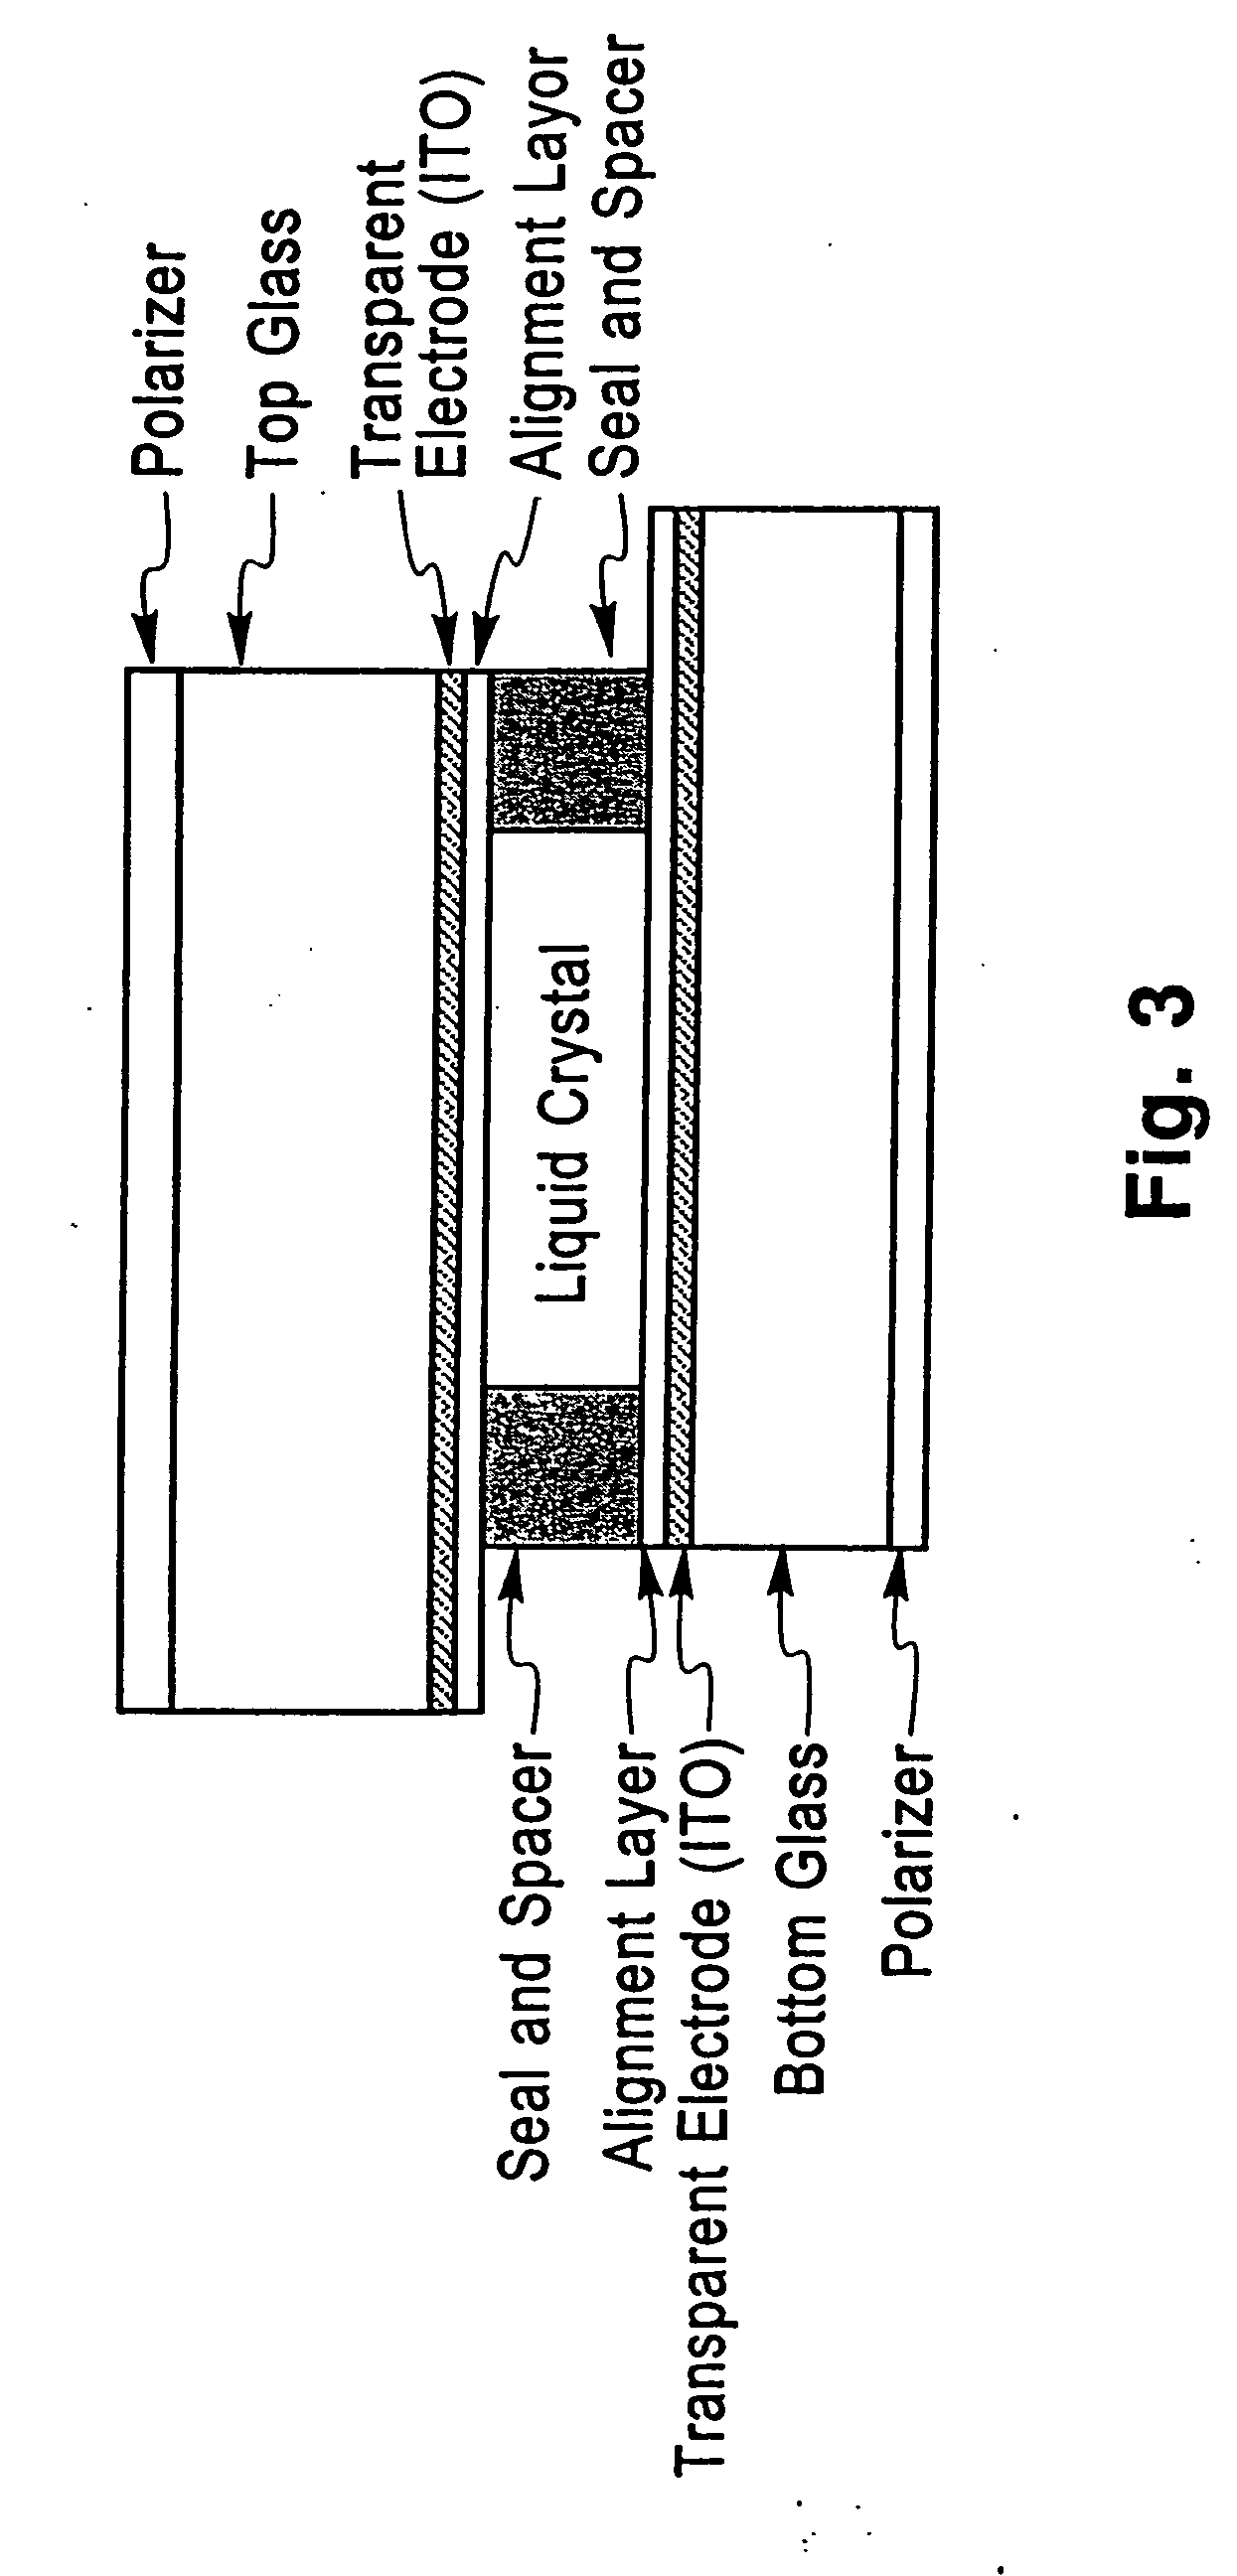 Patterns of electrically conducting polymers and their application as electrodes or electrical contacts